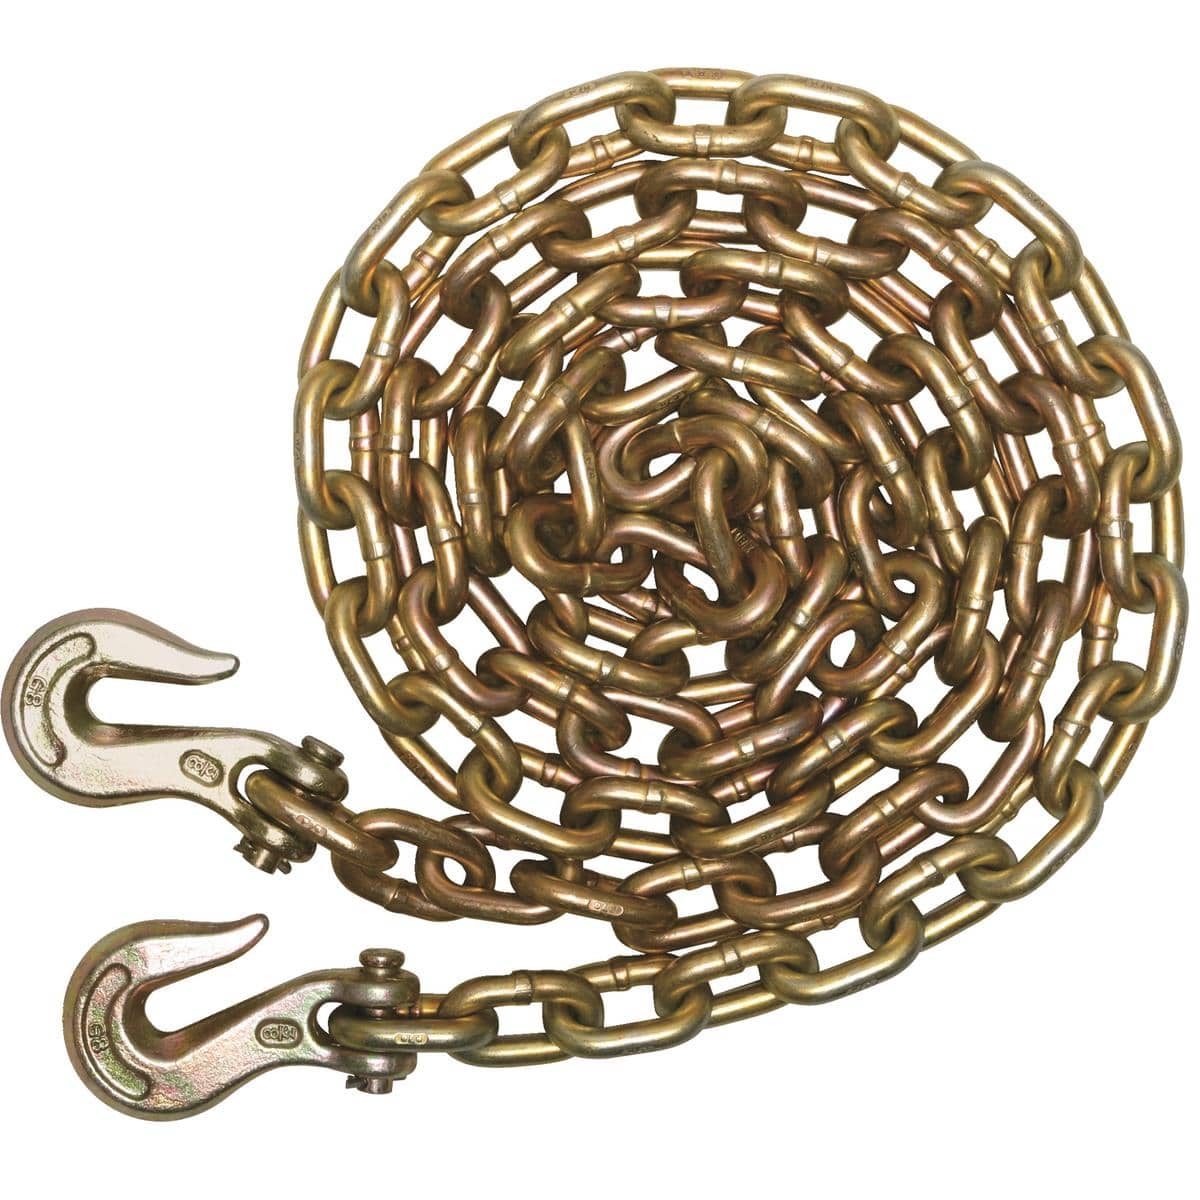 B/A Products Co. Grade 70 Binder Chain with Clevis Grab Hooks by Gempler's